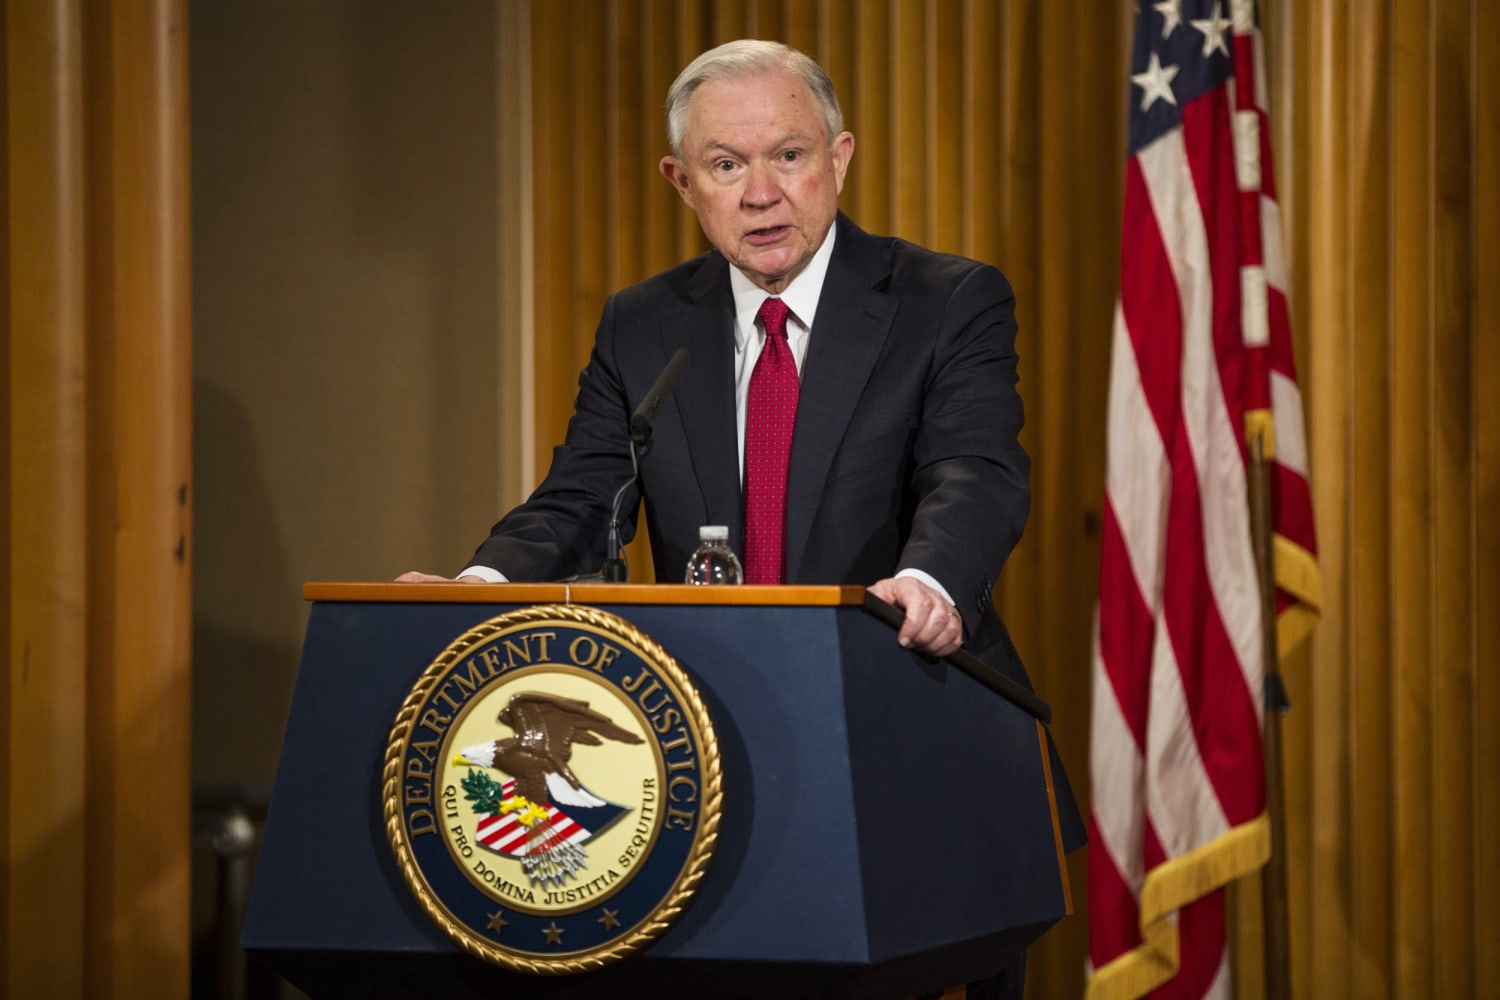 Who Is Jeff Sessions? The Attorney General Is No Stranger to Controversy